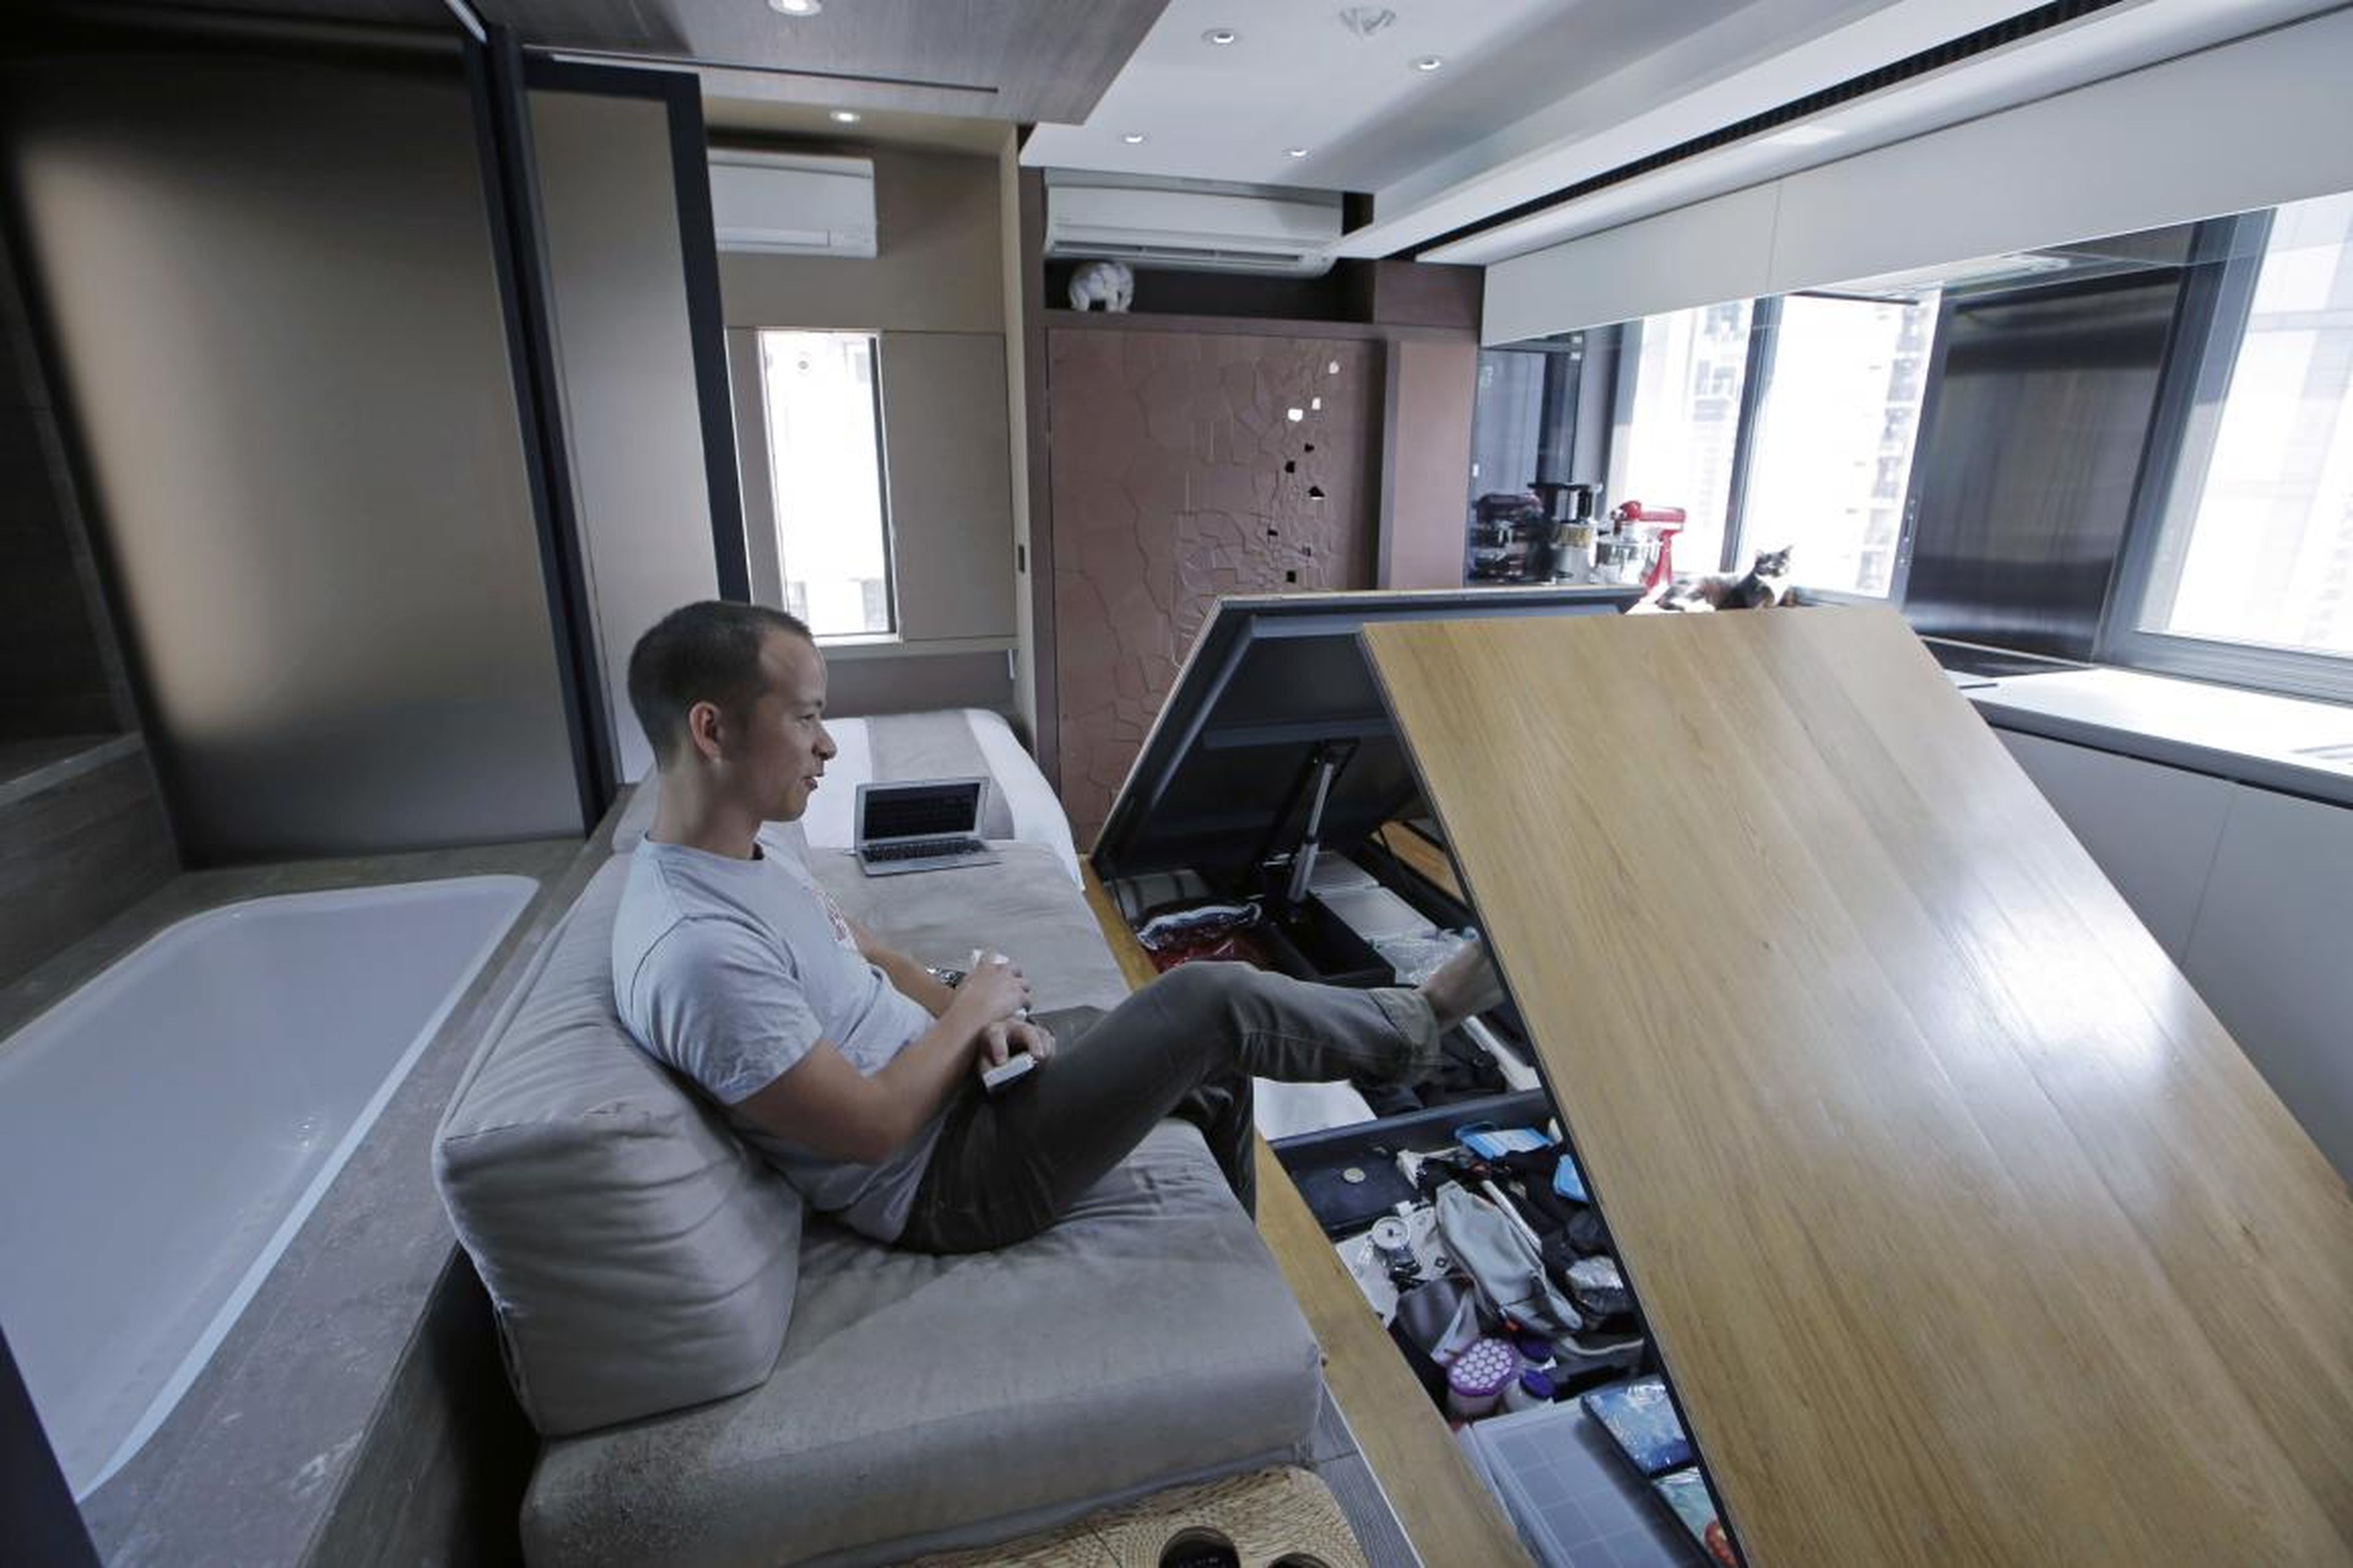 Andy Knight reveals hidden storage compartments in his Hong Kong microapartment.